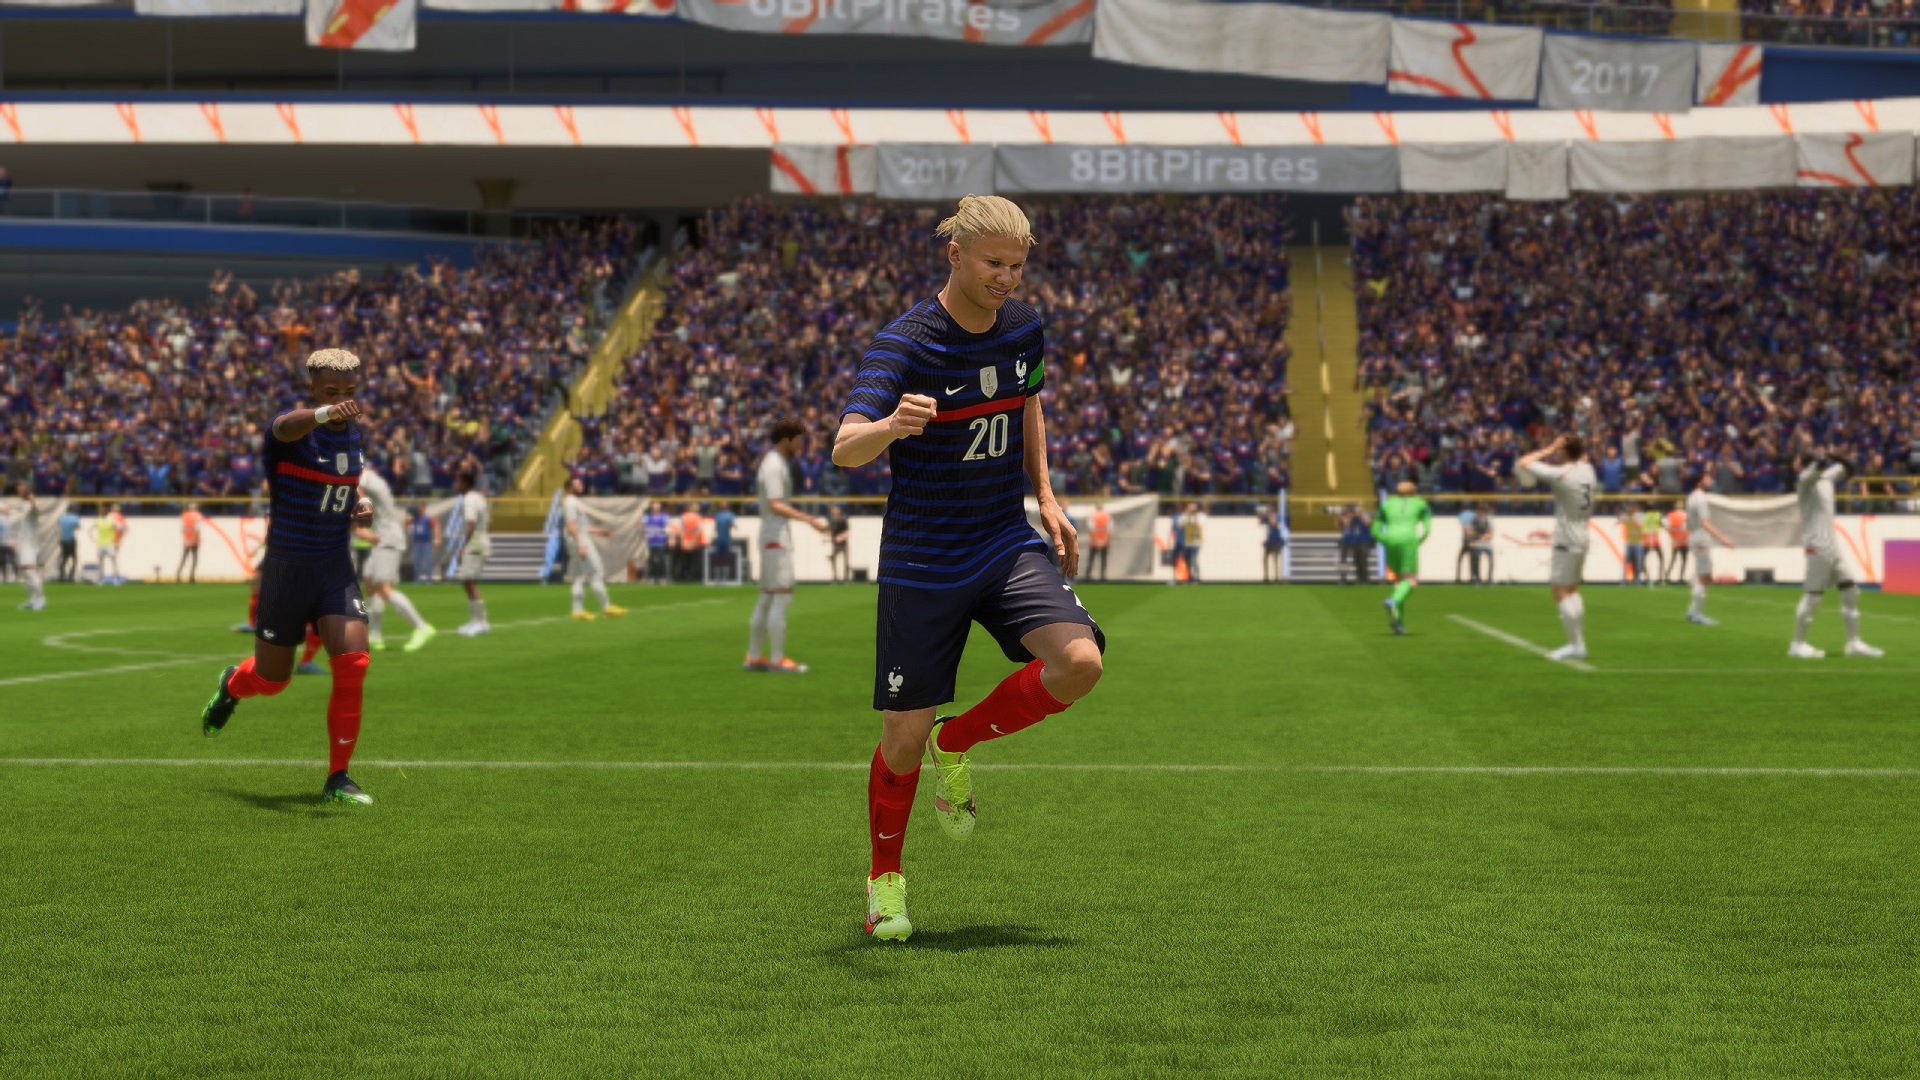 FIFA 23 Pro Clubs Game Mode Tips